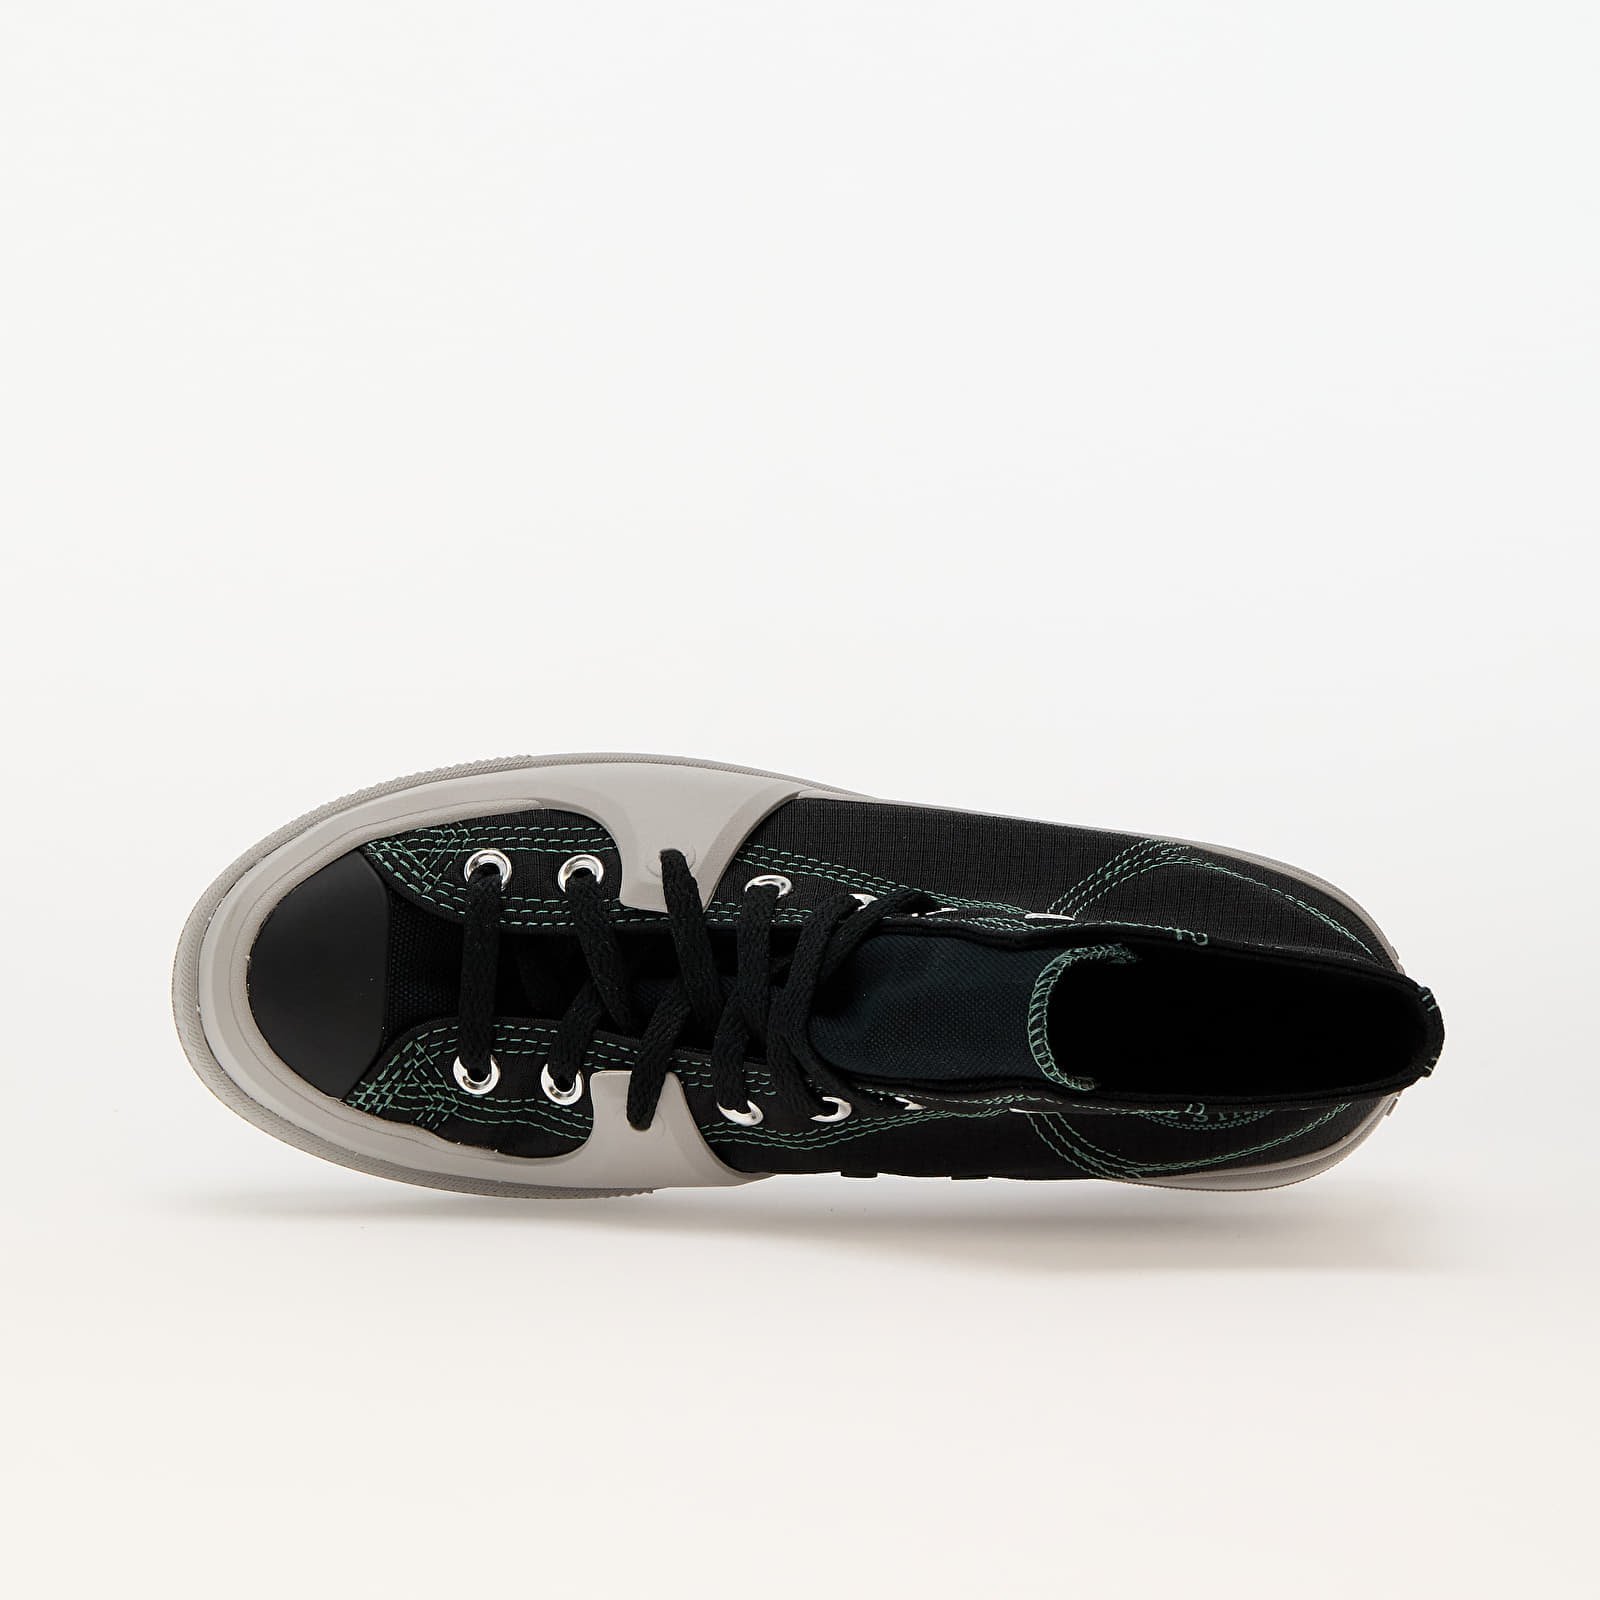 Chuck Taylor All Star Construct Black/ Totally Neutral